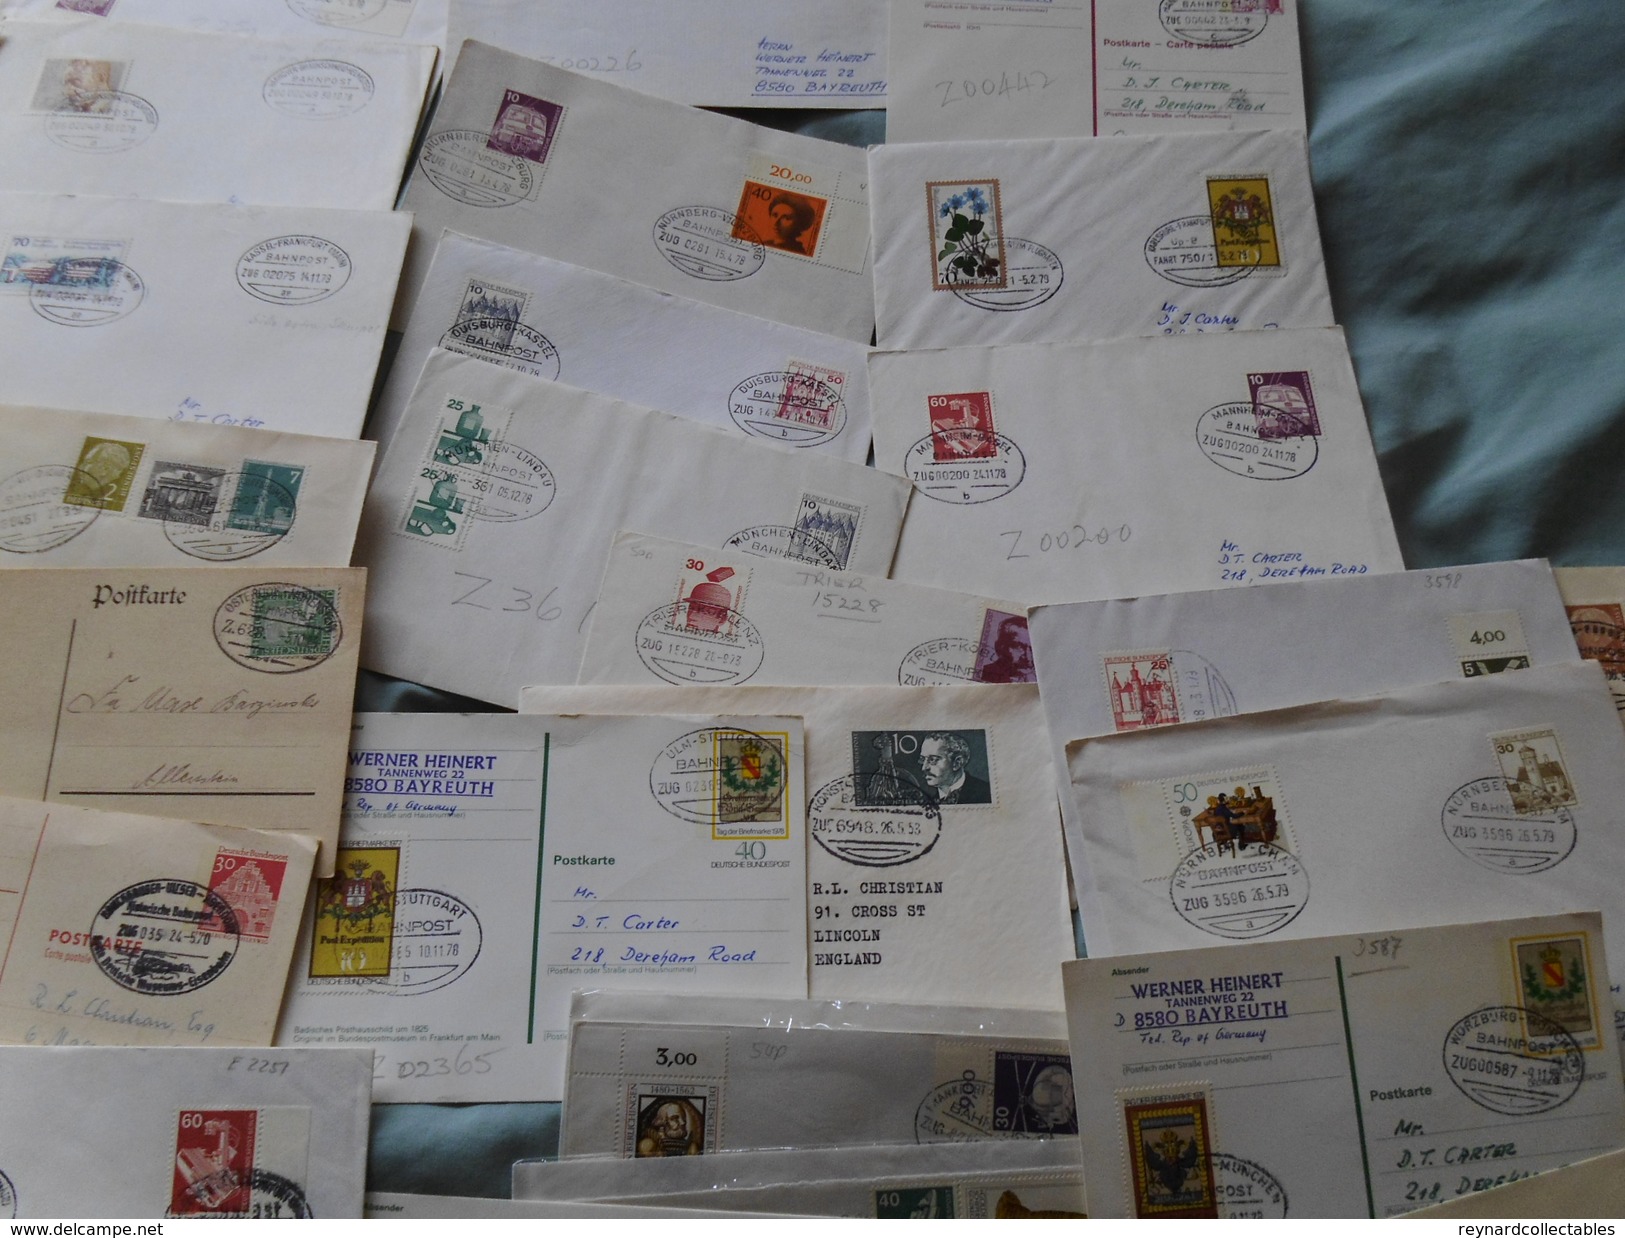 Germany large collection covers/cards TPO/Railway Bahnpost covers/cards+ (550 items!!) 1890s-2000s